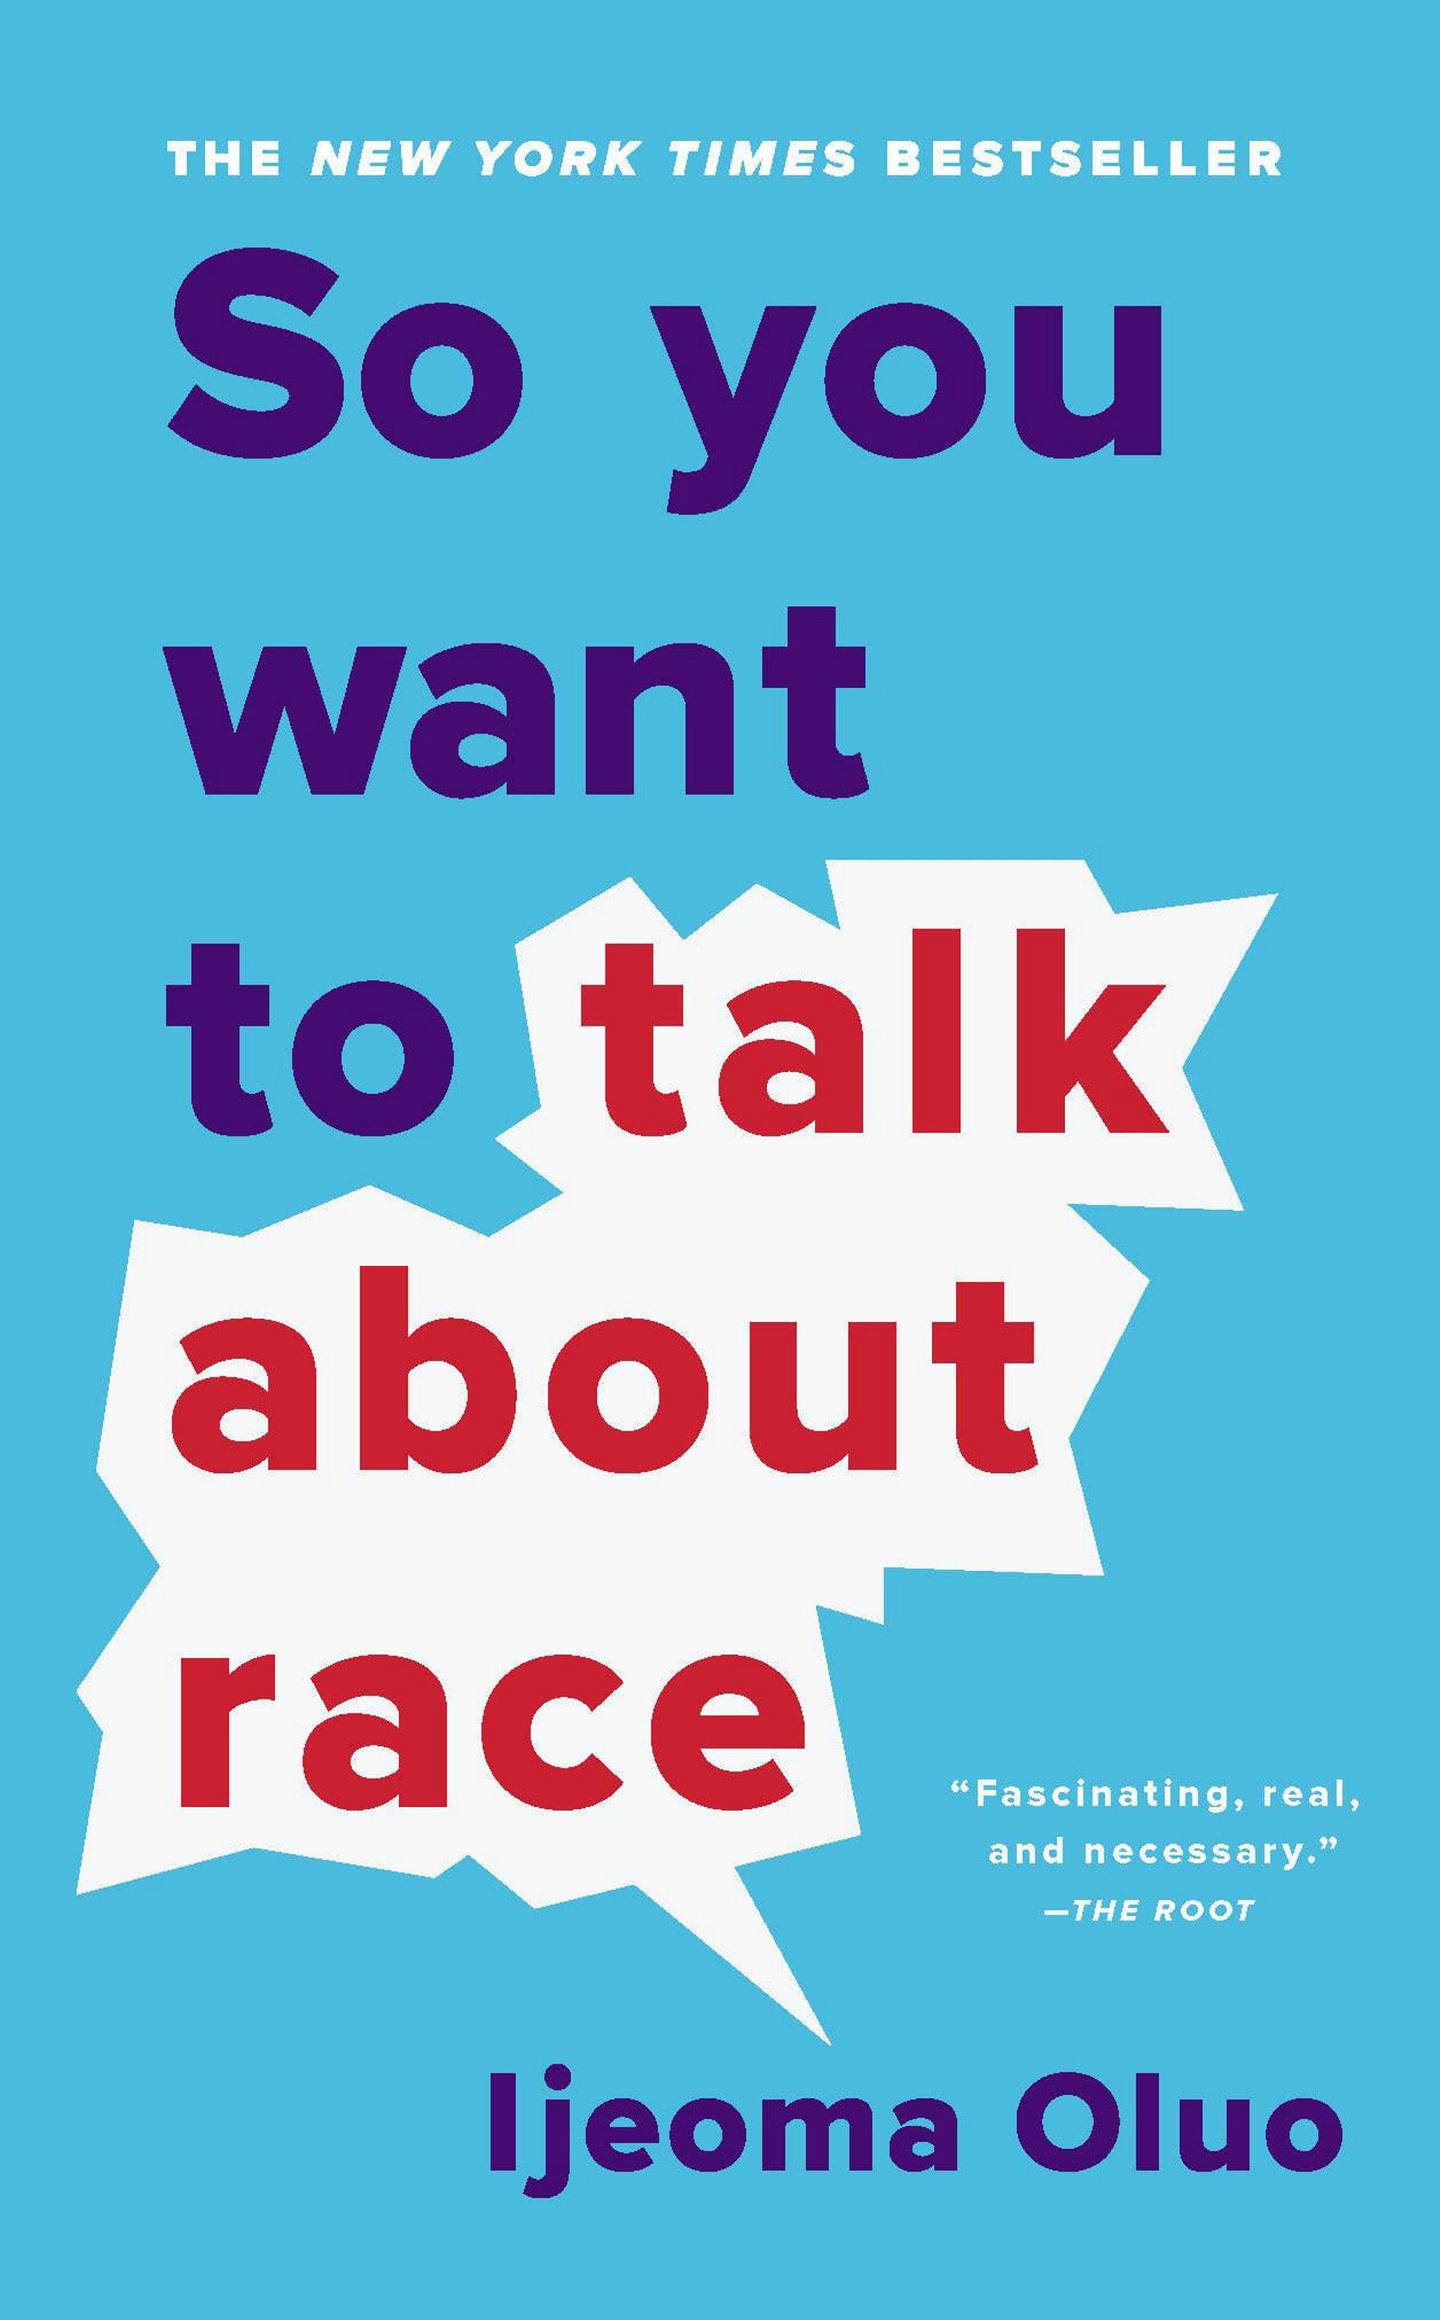 So You Want to Talk About Race by Ijeoma Oluo published by Seal Press. Courtesy Hachette Group